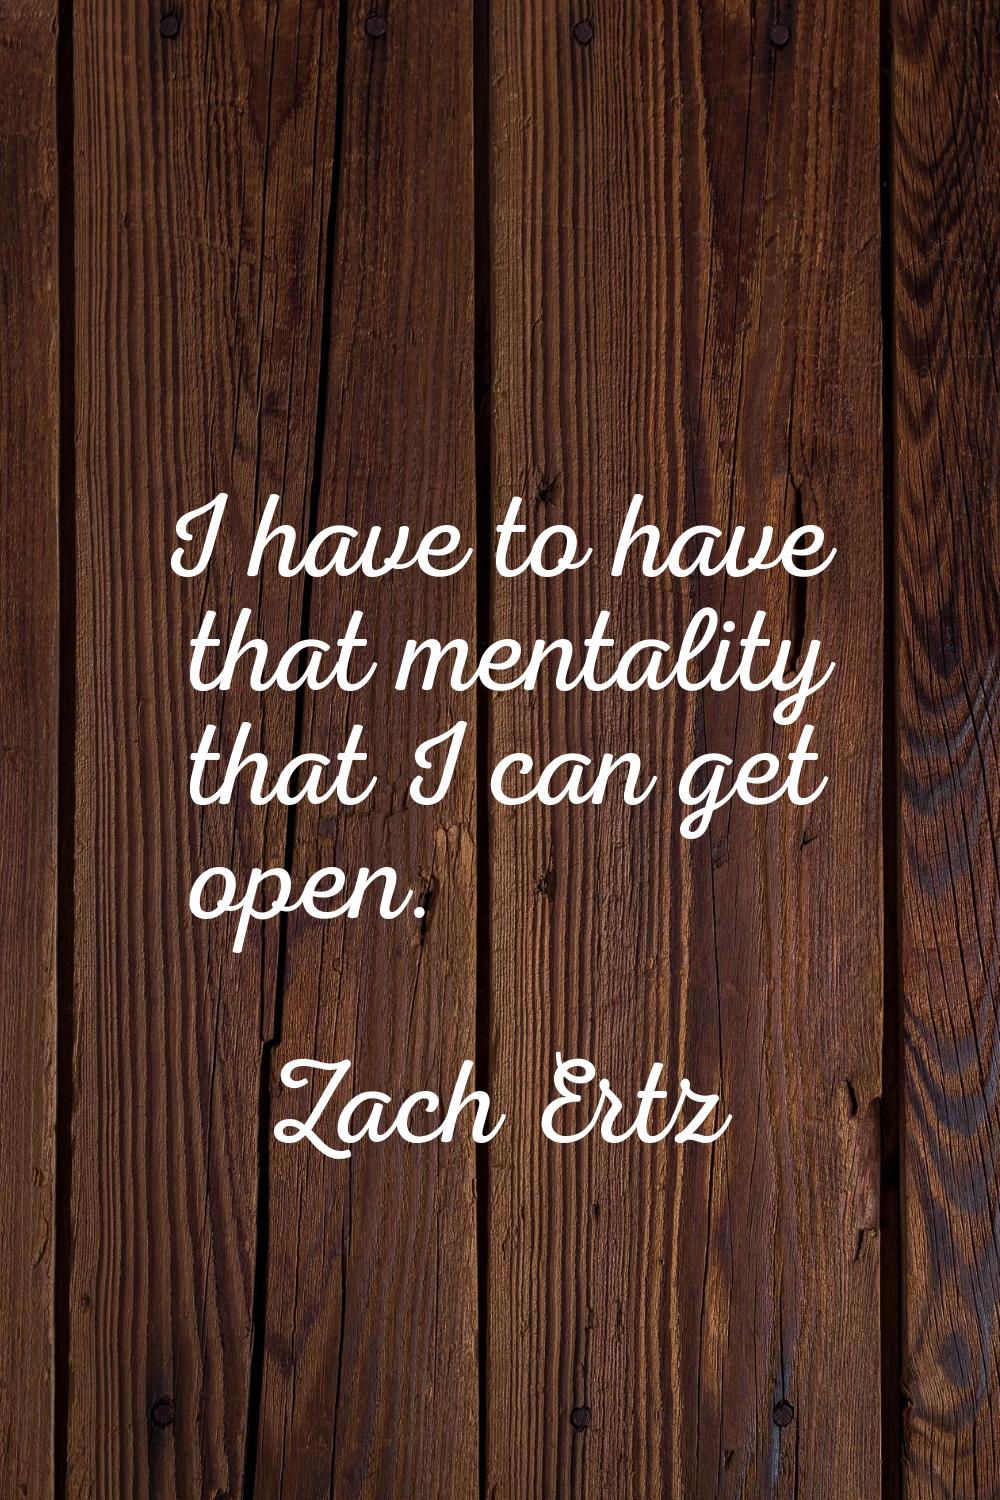 I have to have that mentality that I can get open.